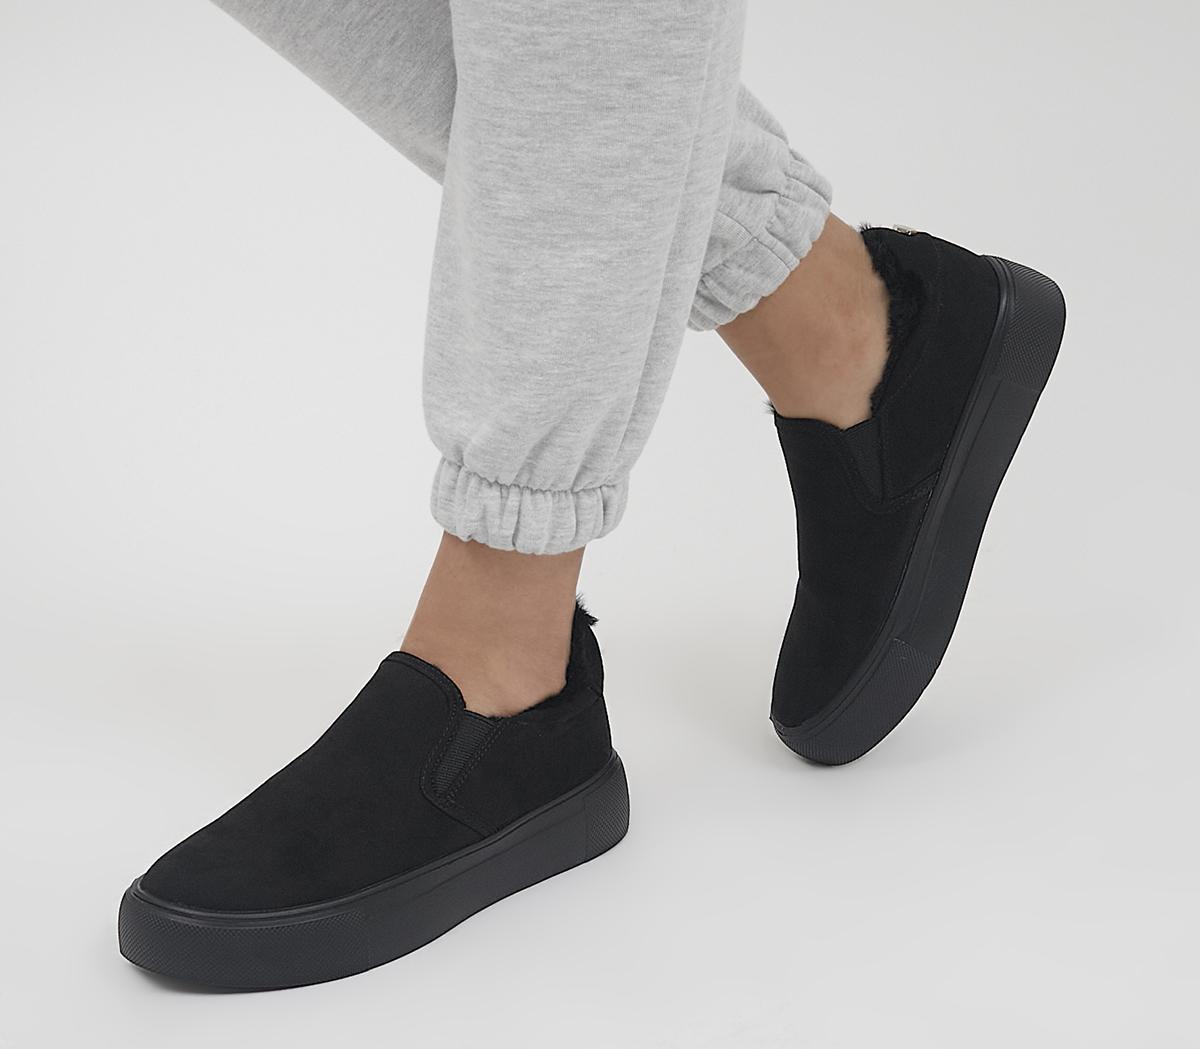 OfficeFade Slip On TrainersBlack Drench Faux Fur Lined